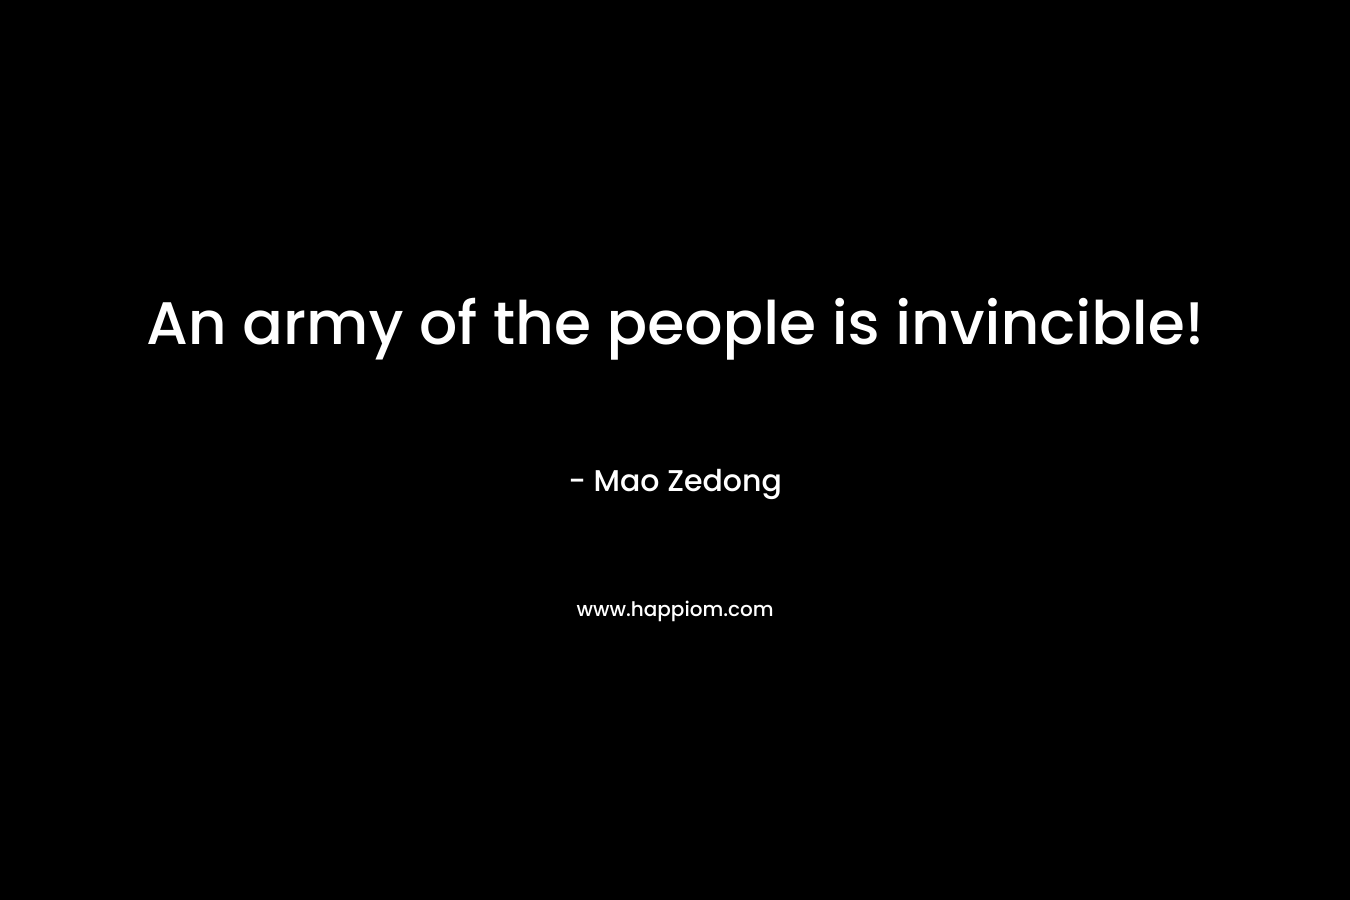 An army of the people is invincible! – Mao Zedong